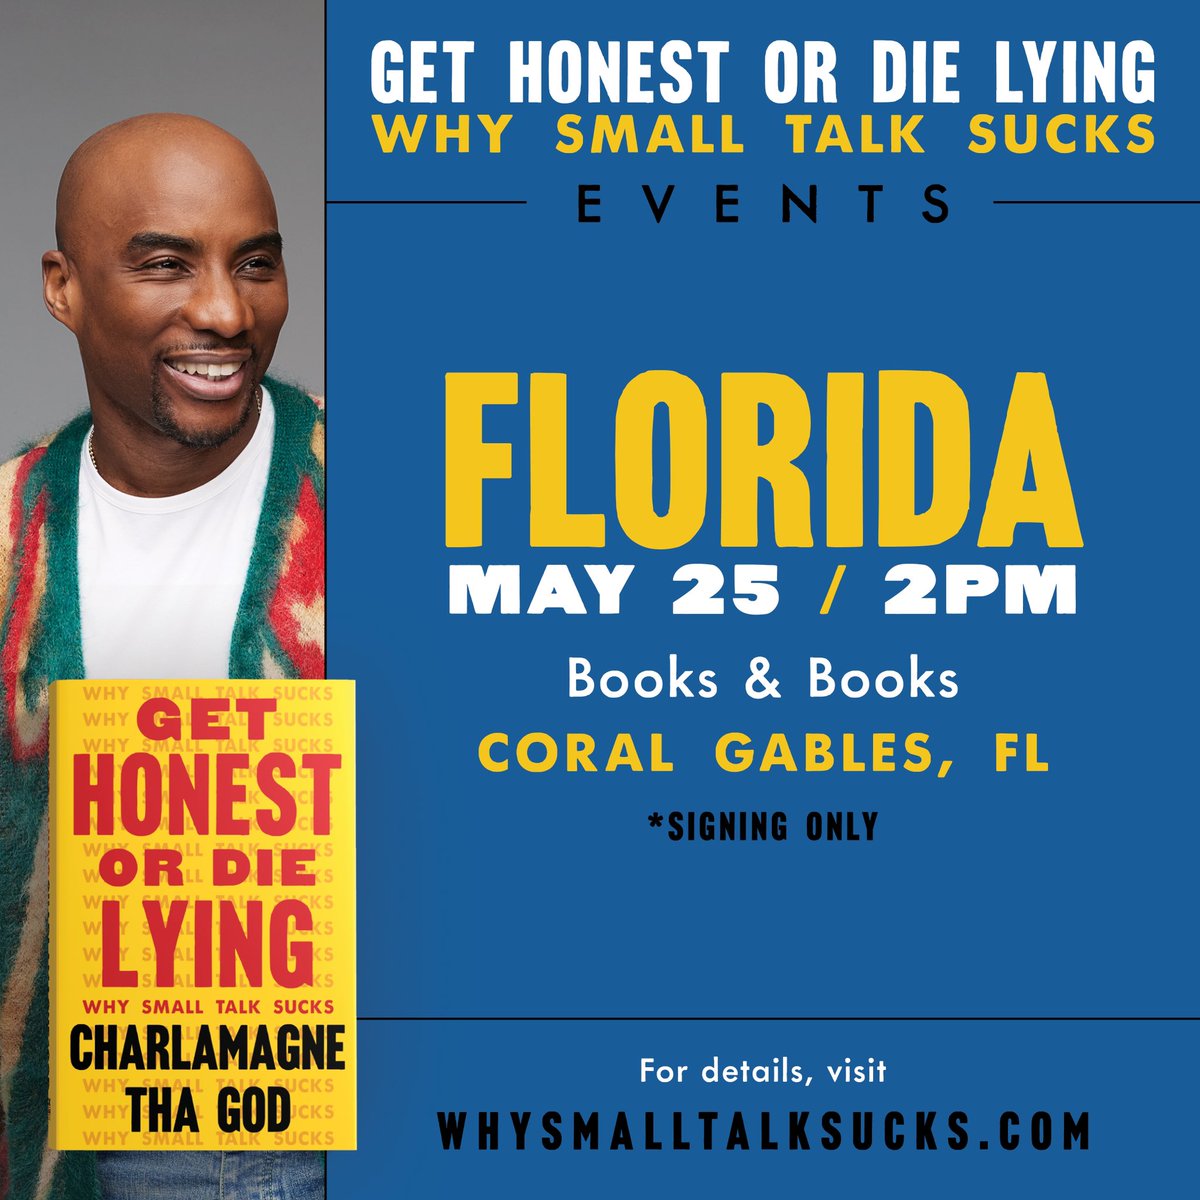 Florida I will be at @BooksandBooks May 25th at 2pm!! For details visit: eventbrite.com/e/a-signing-wi… #WhySmallTalkSucks